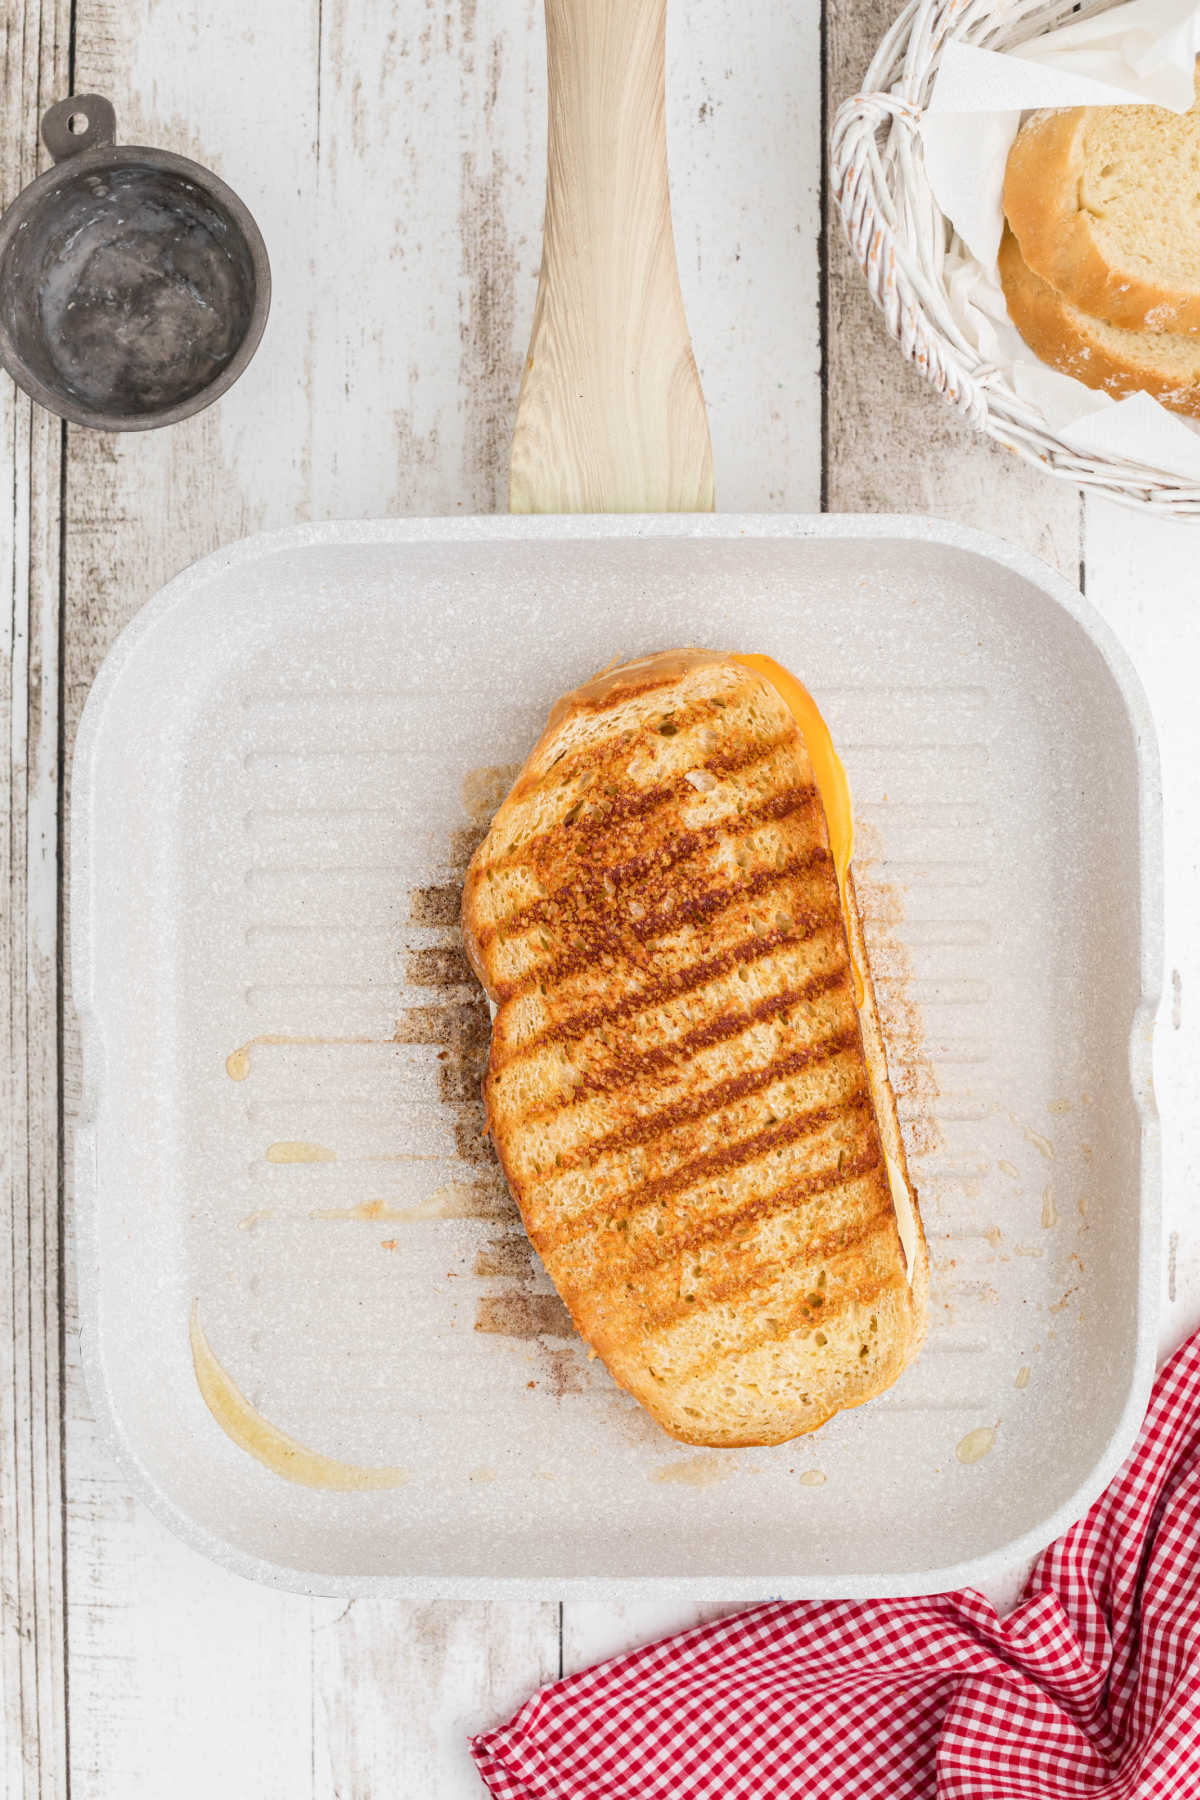 A starbucks grilled cheese in a grill pan.